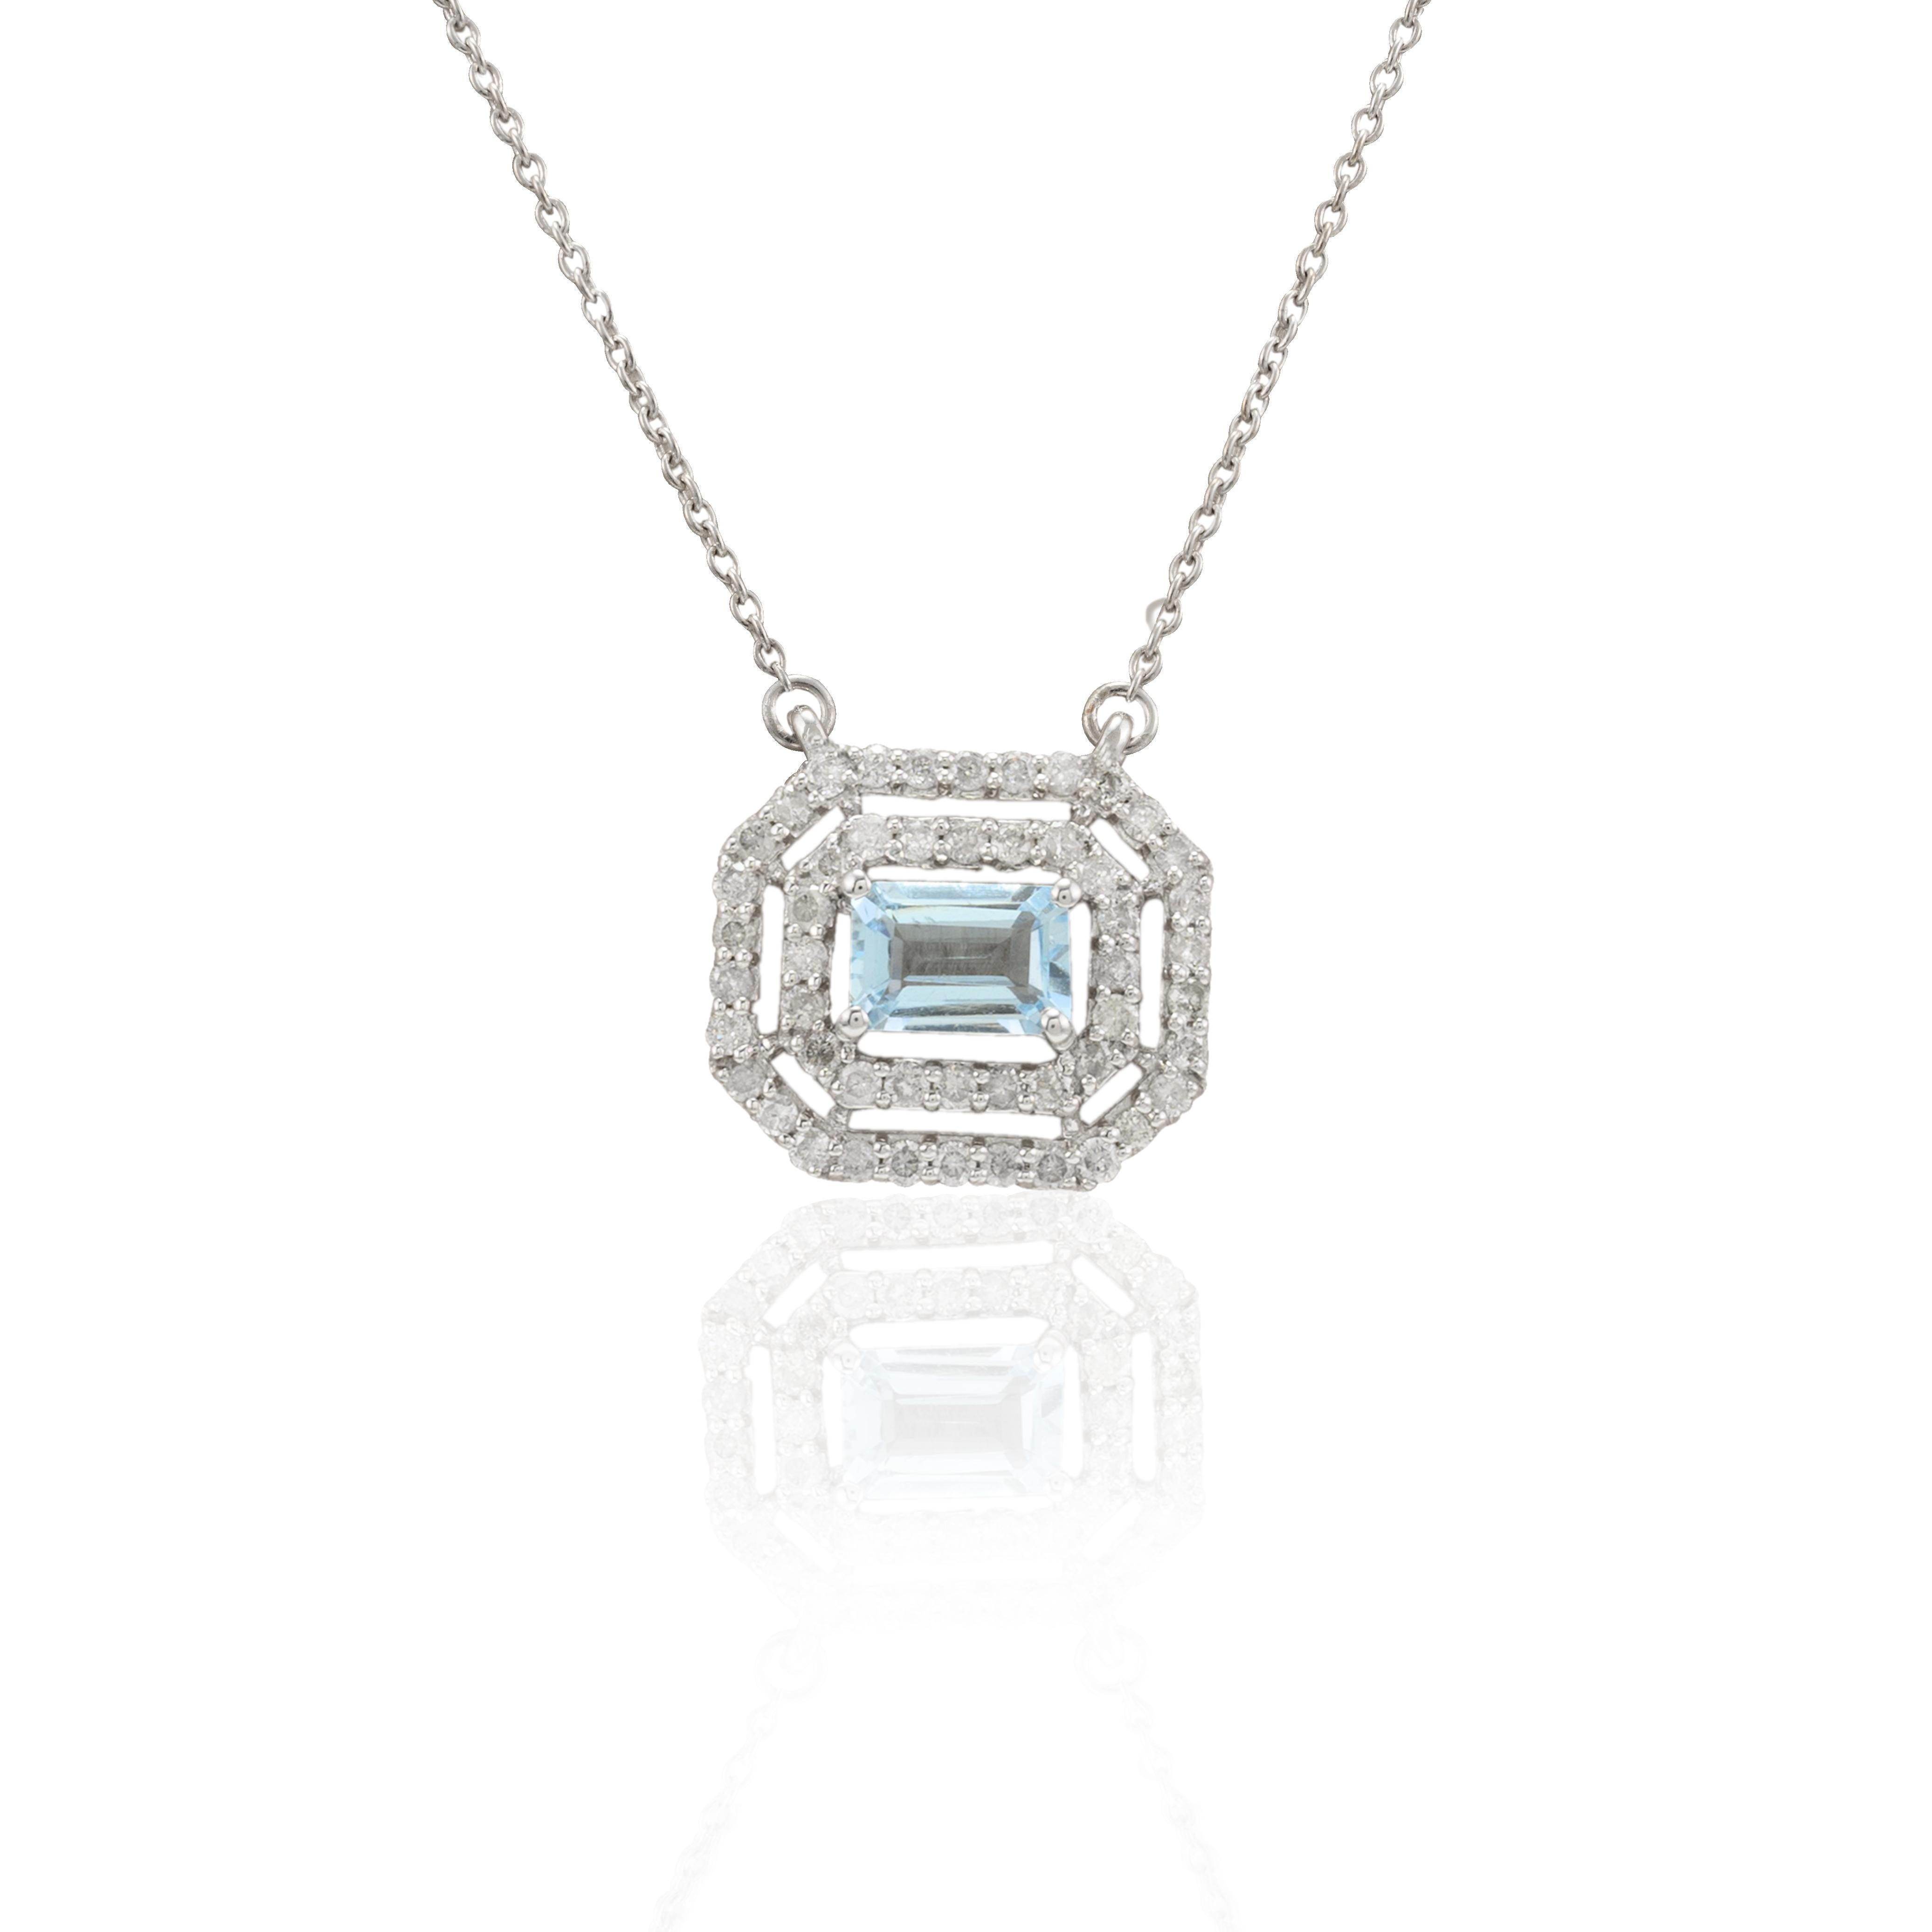 Everyday Diamond Aquamarine Chain Necklace in 14K Gold studded with octagon cut aquamarine halo diamonds. This stunning piece of jewelry instantly elevates a casual look or dressy outfit. 
Aquamarine is useful for moving through transition and